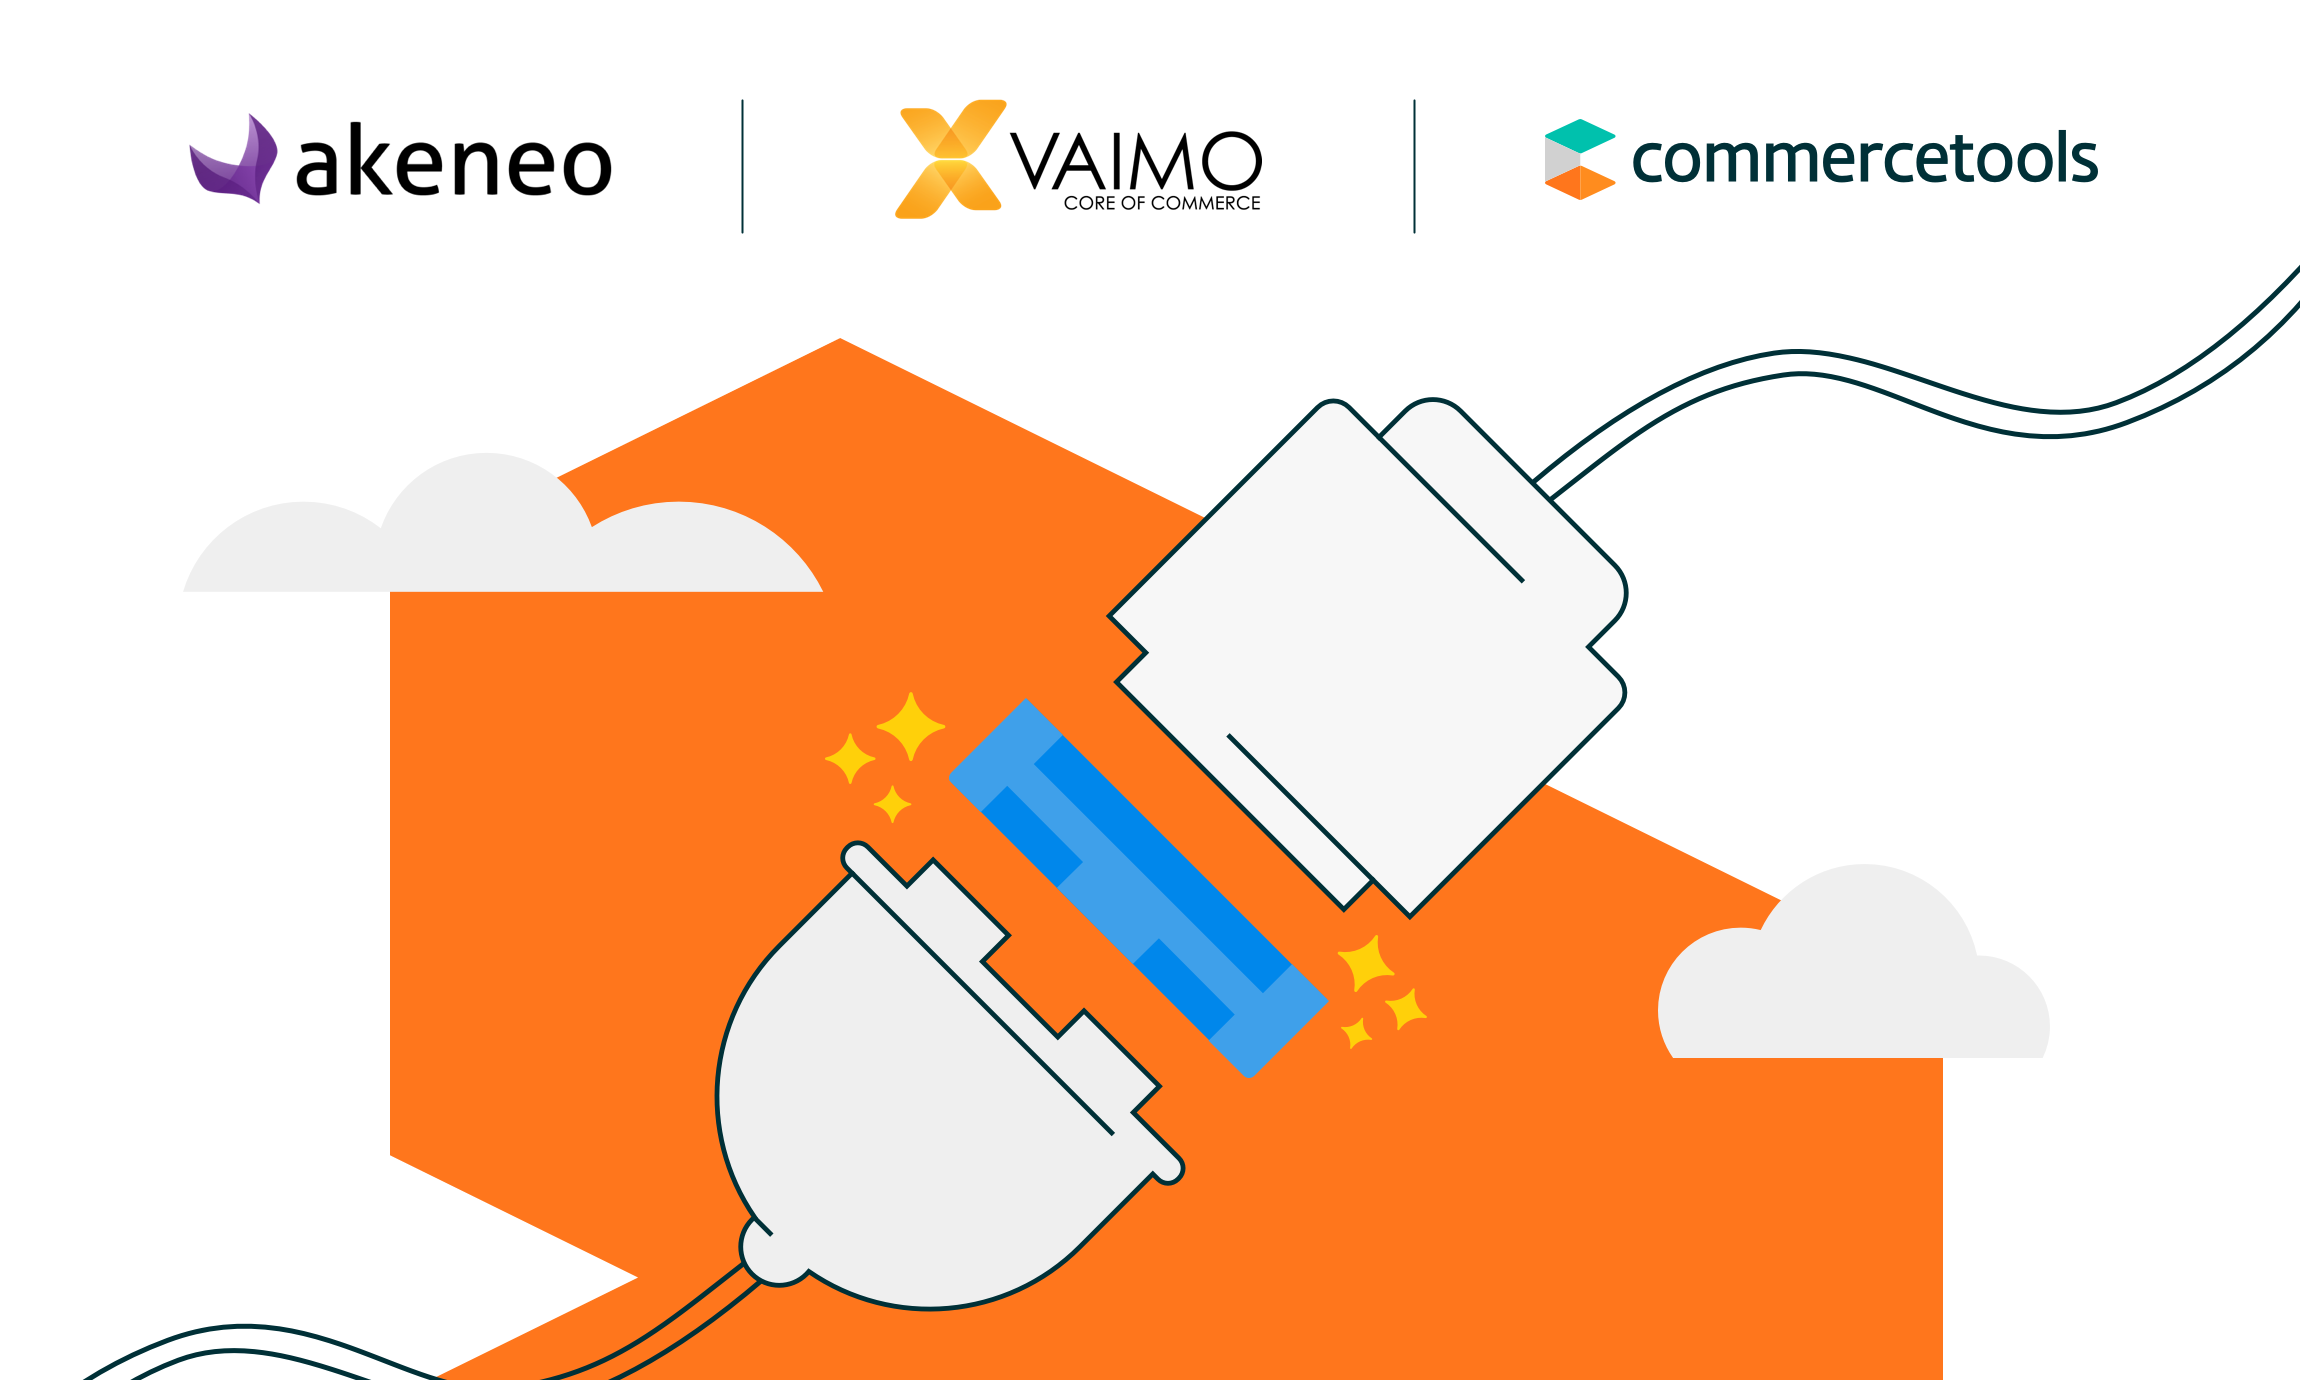 The New Vaimo PIM Connector for Akeneo and commercetools Microservices for Composable Architecture